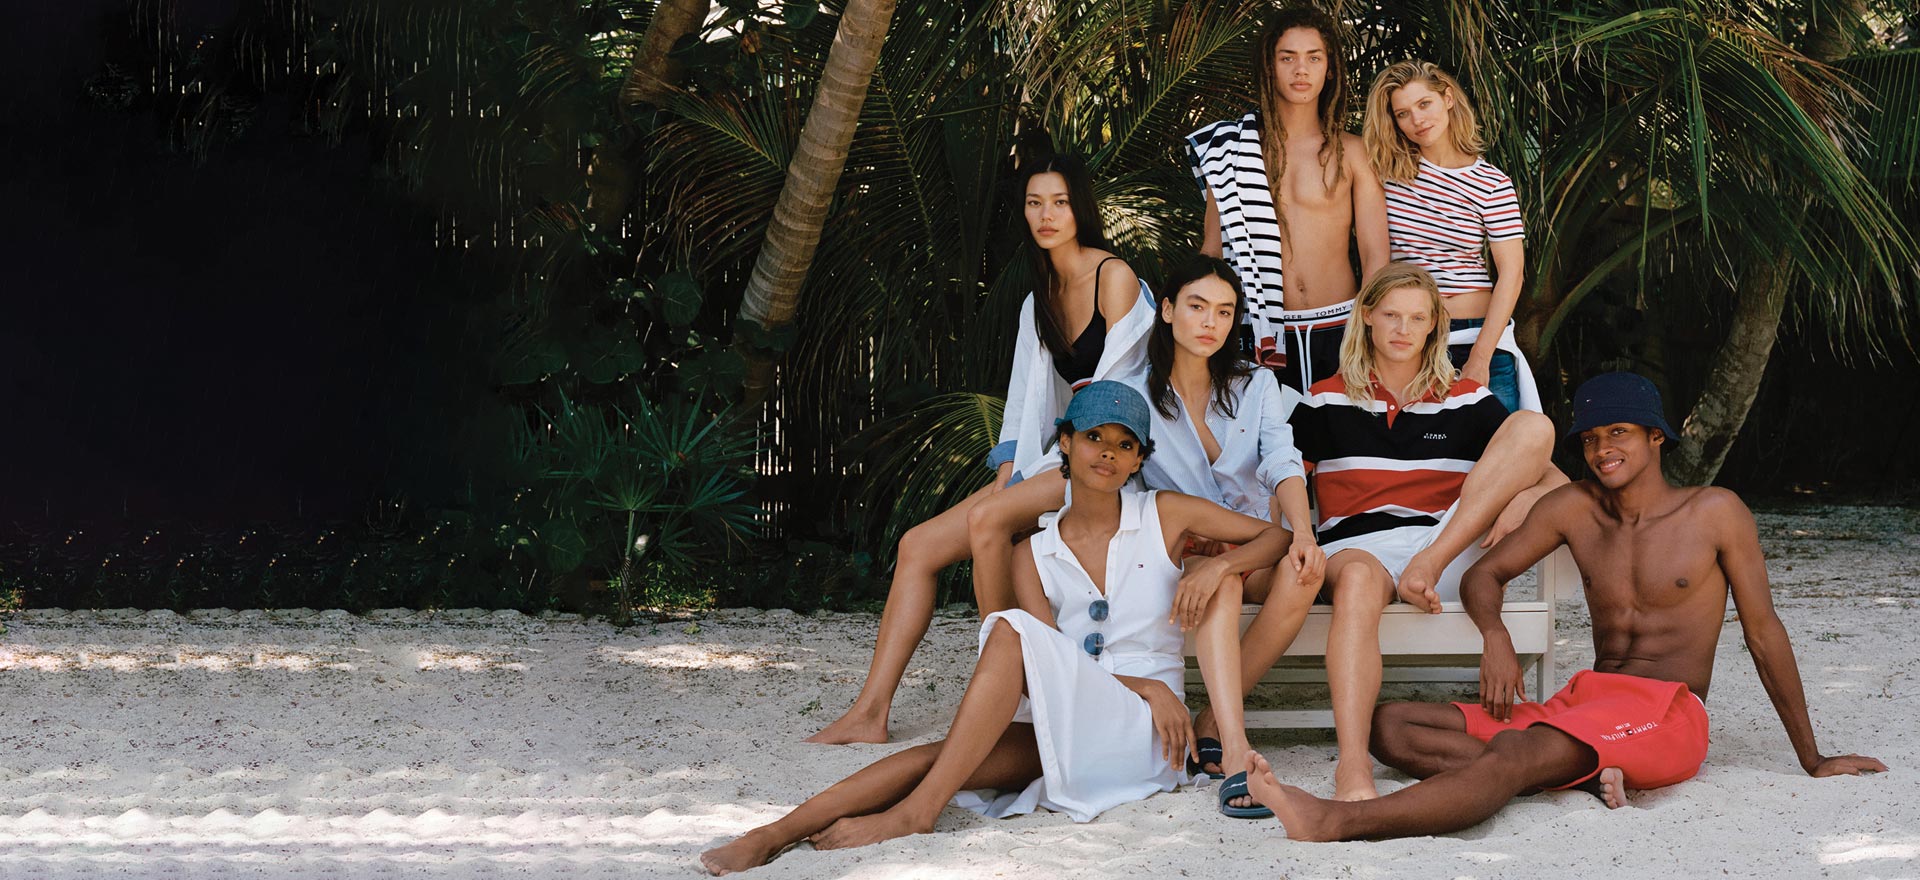 Tommy Hilfiger USA | Online Site and